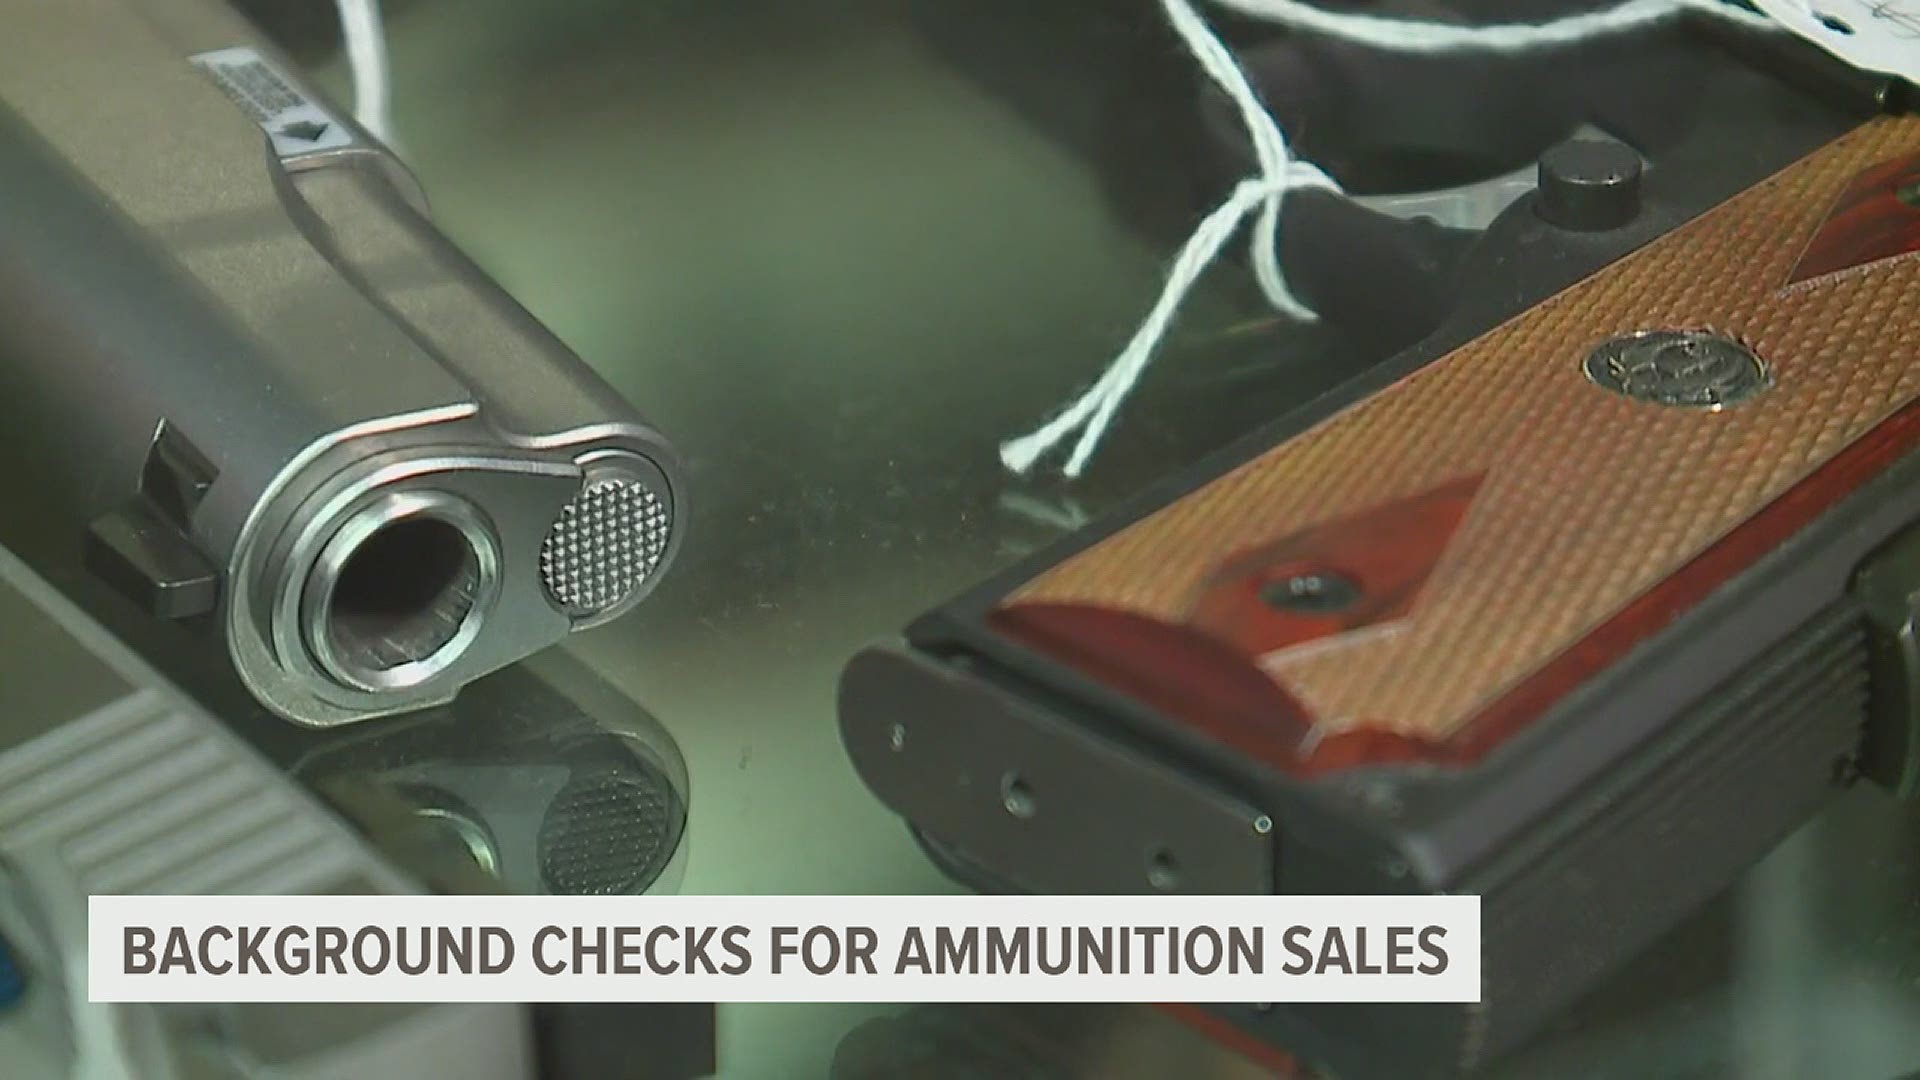 Pennsylvania does not currently regulate the sale, purchase or possession of ammunition.